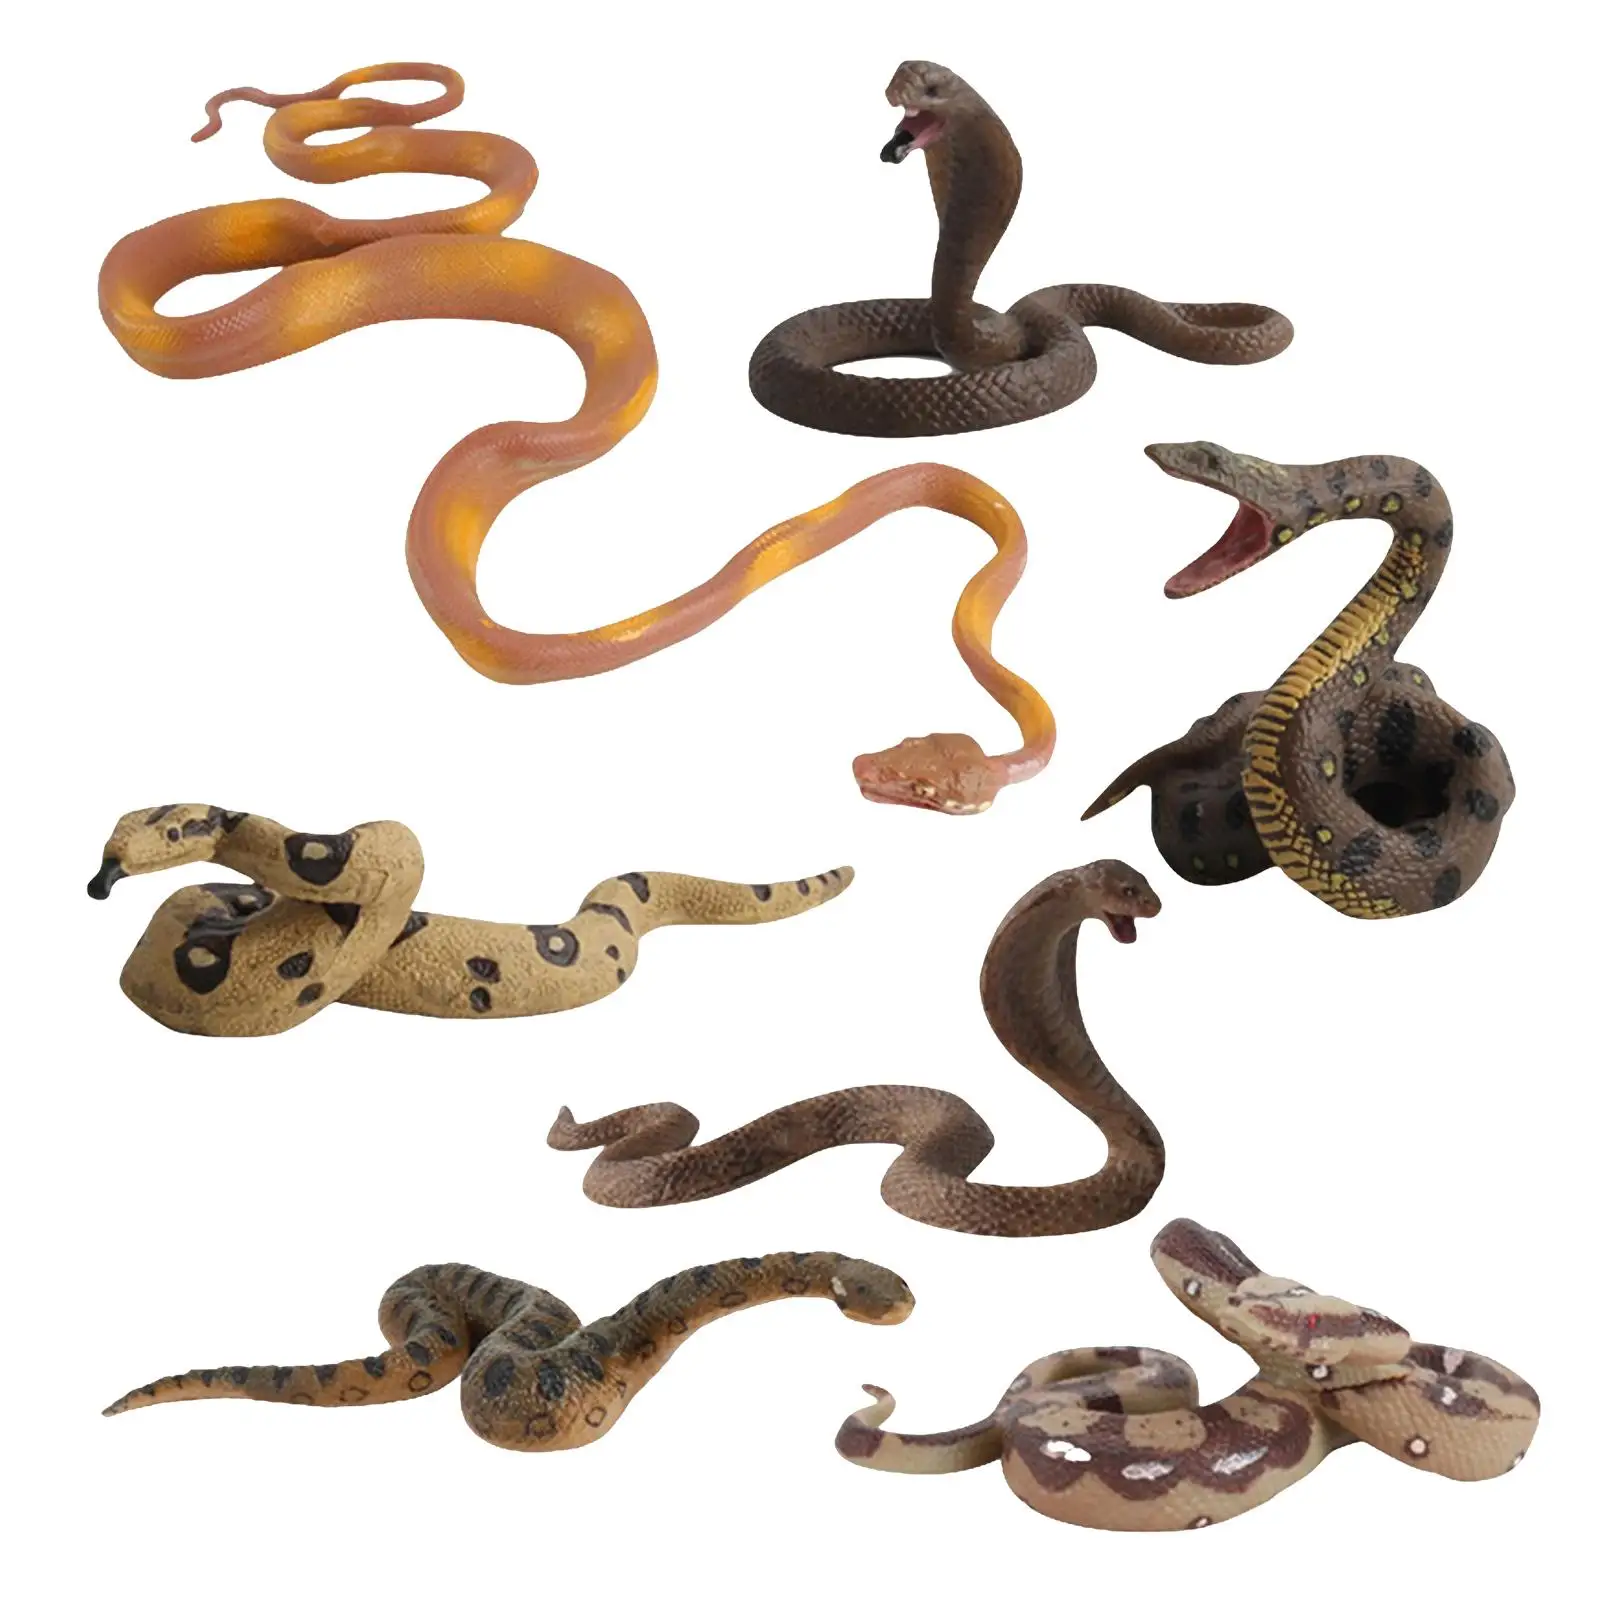 Simulation Snake Model Toy Wildlife Animal for Party Tricks Tabletop